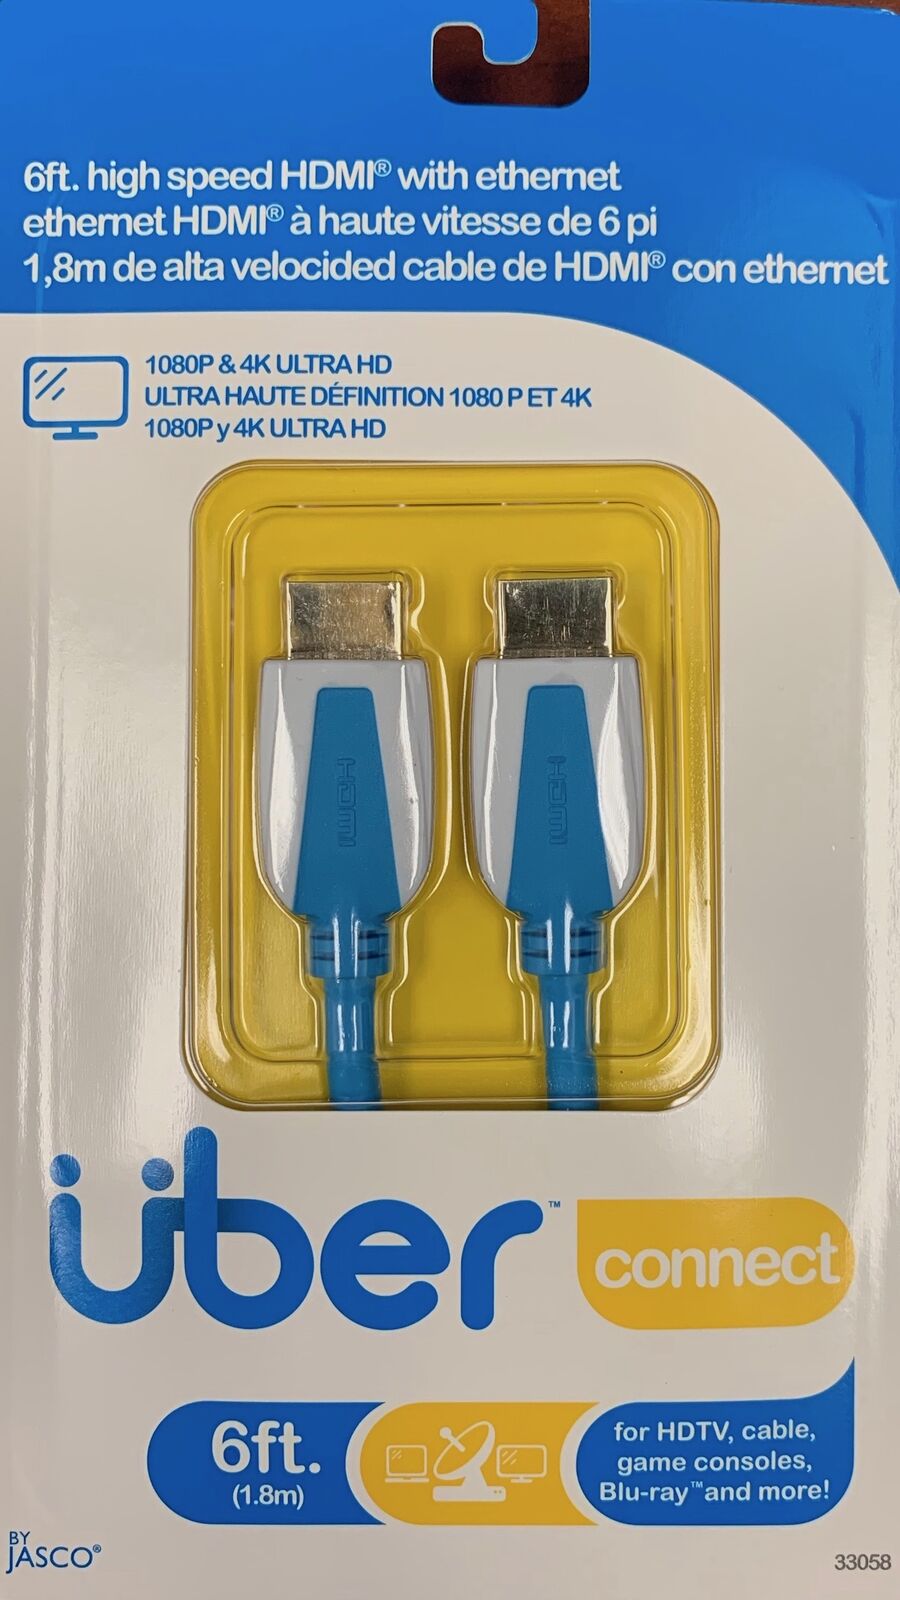 Uber HDMI Cable, High Speed, Ethernet, 6 Foot HDMI, 4K Ultra HD, Full HD 1080P